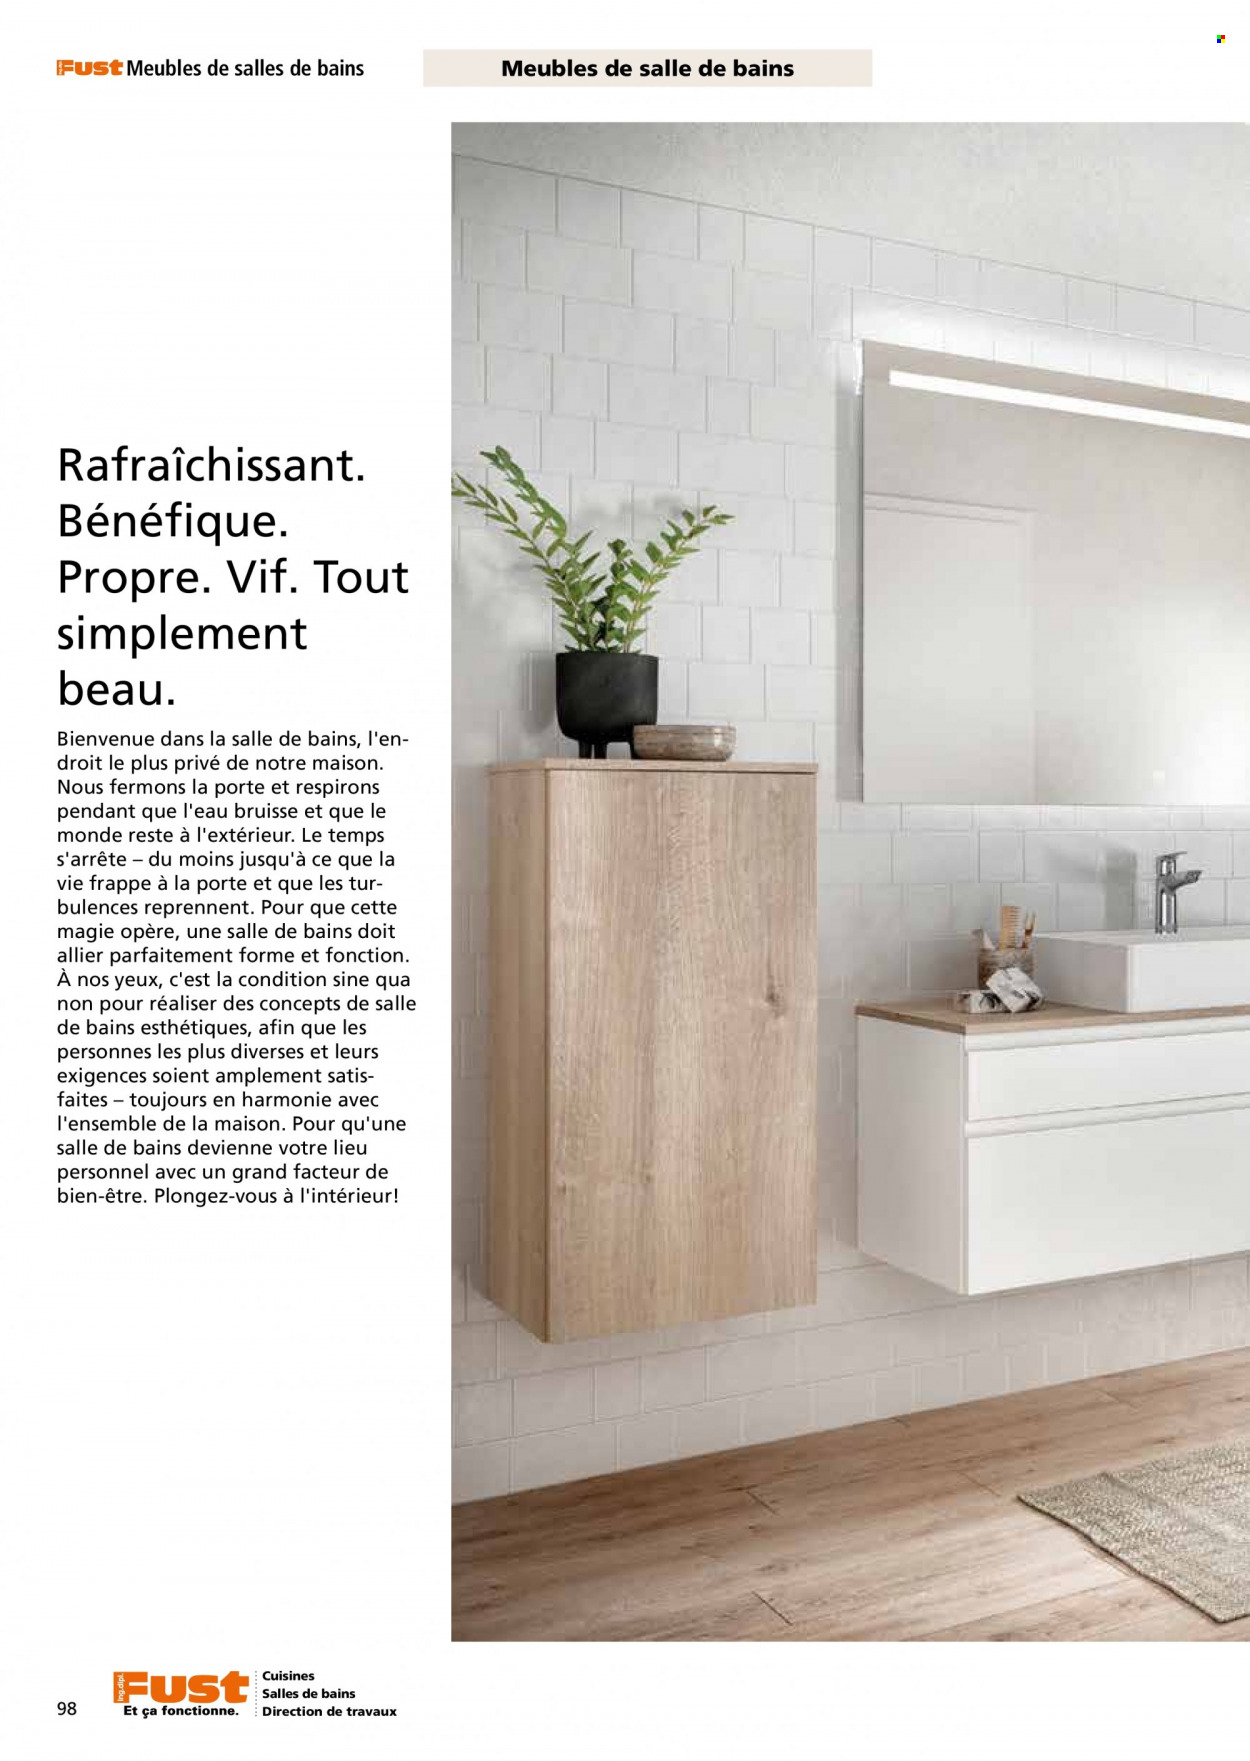 Catalogue Fust. Page 98.